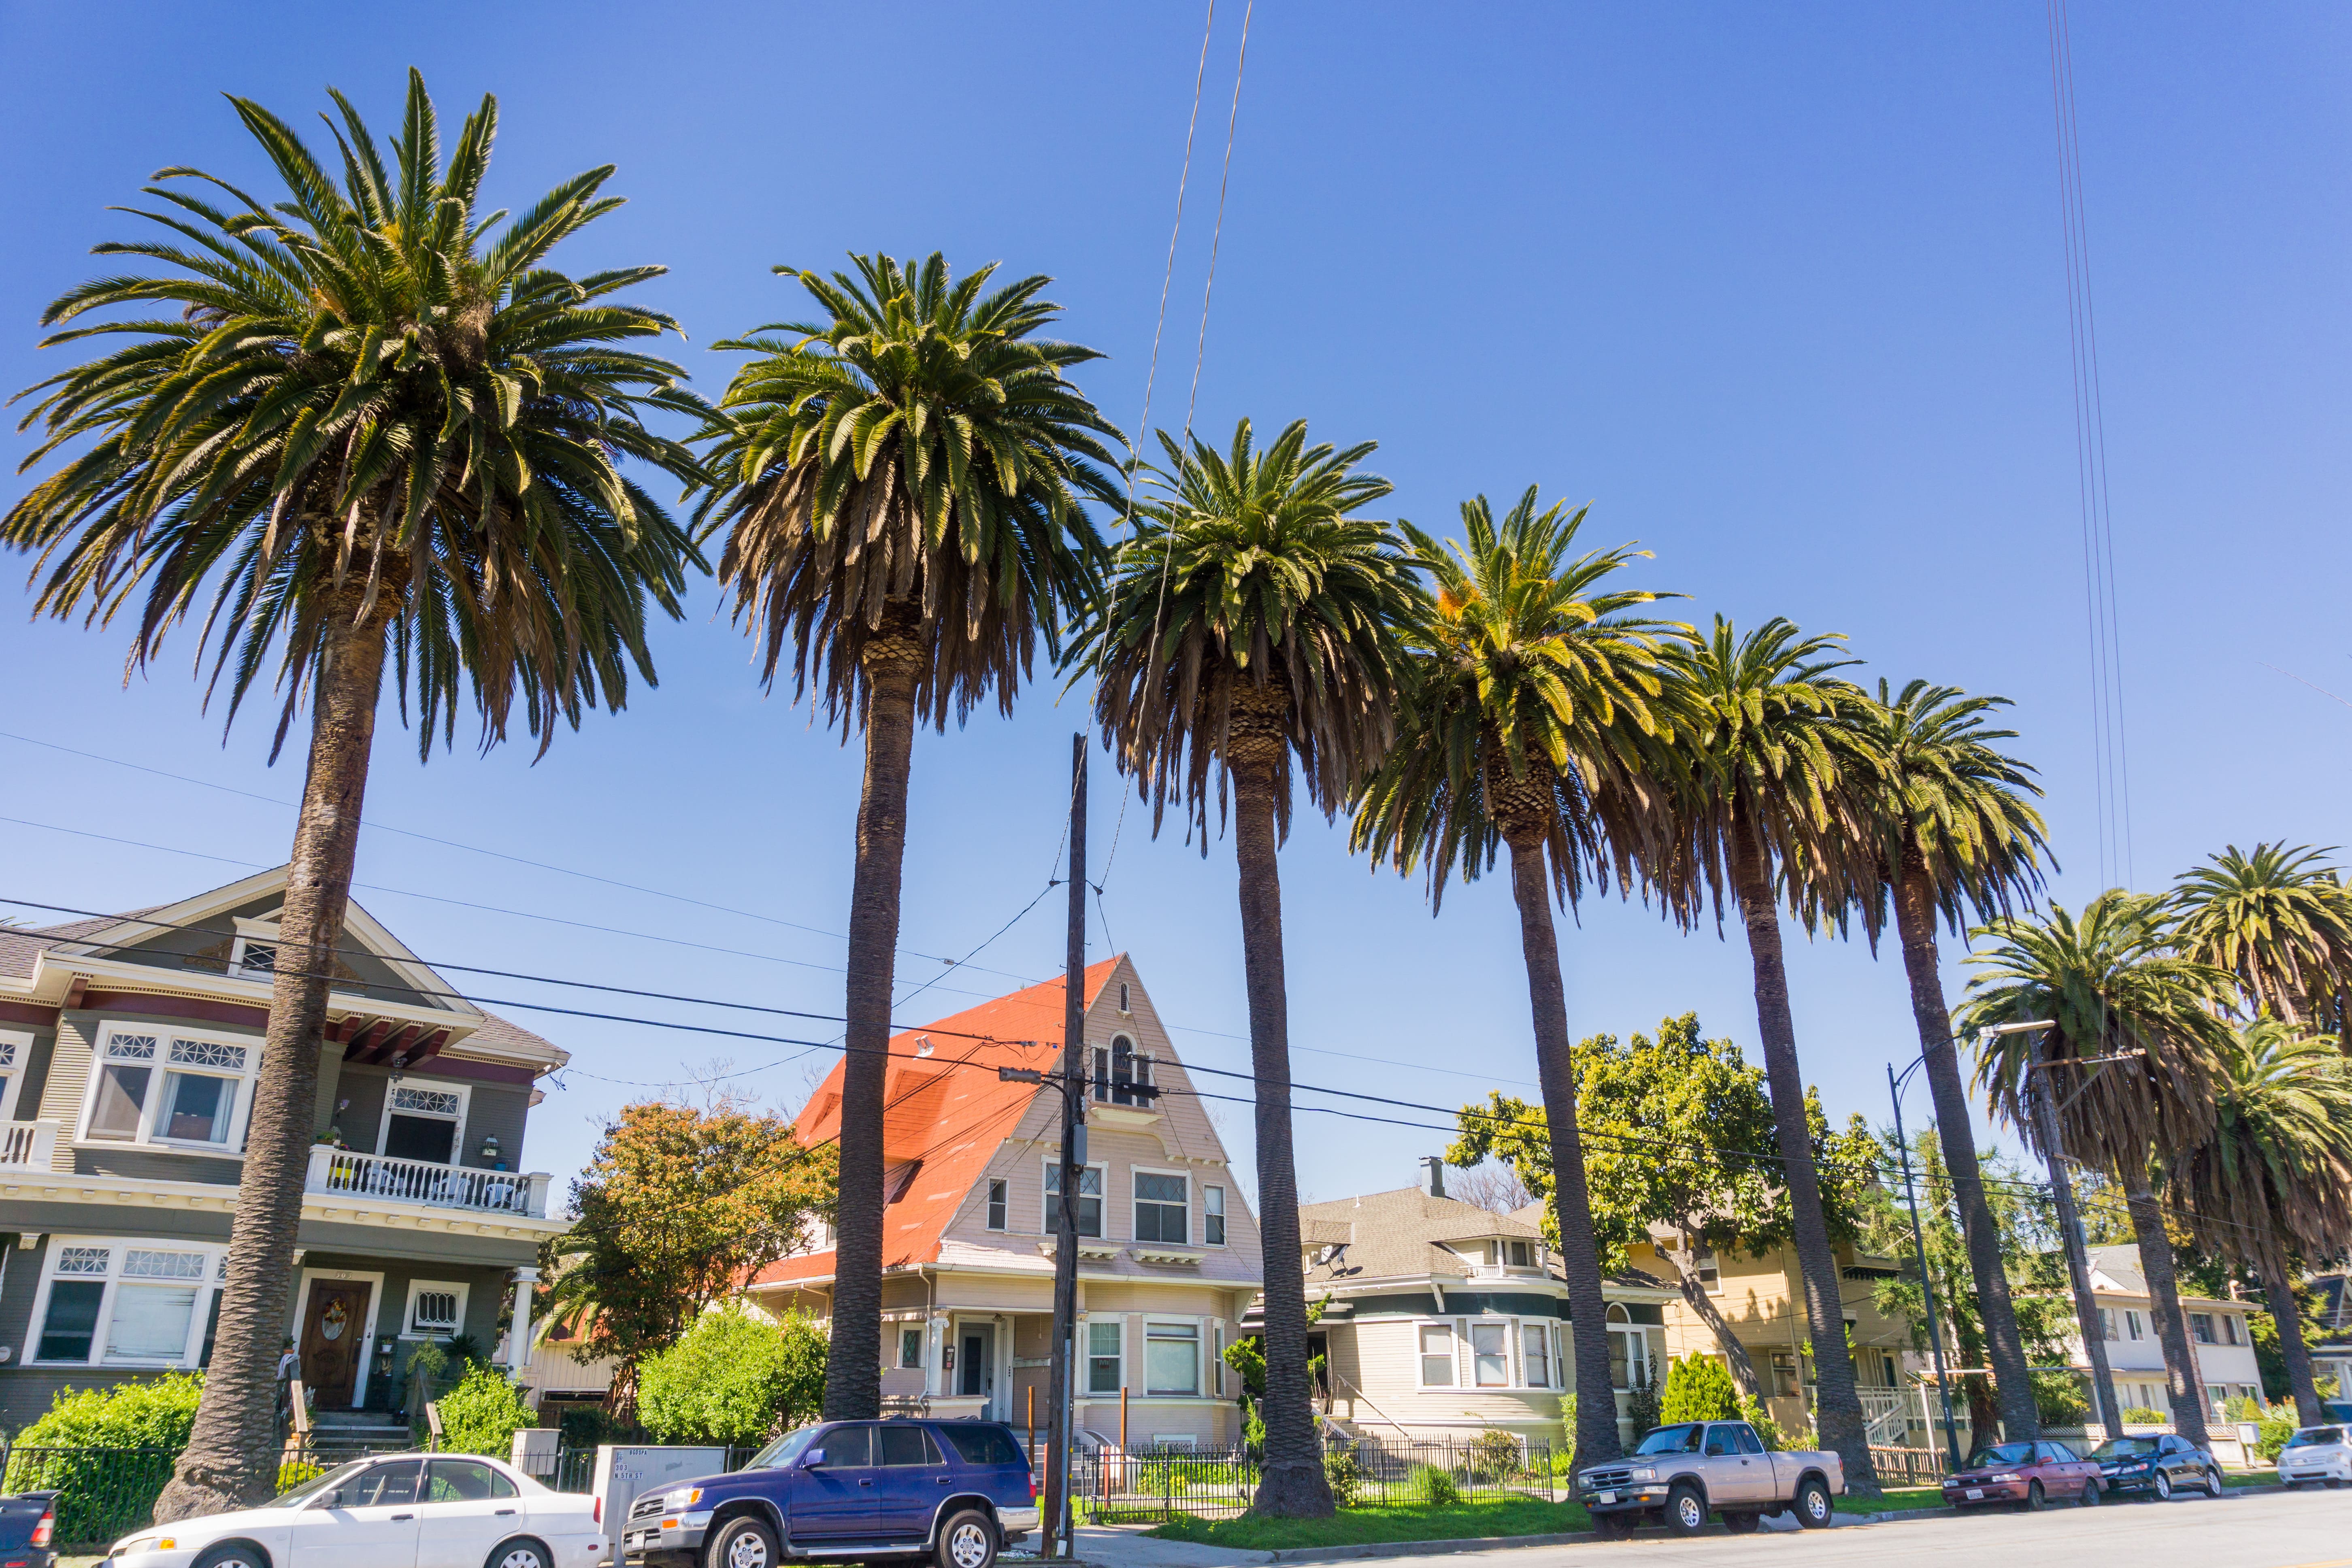 An image of palm trees in front of houses in the city